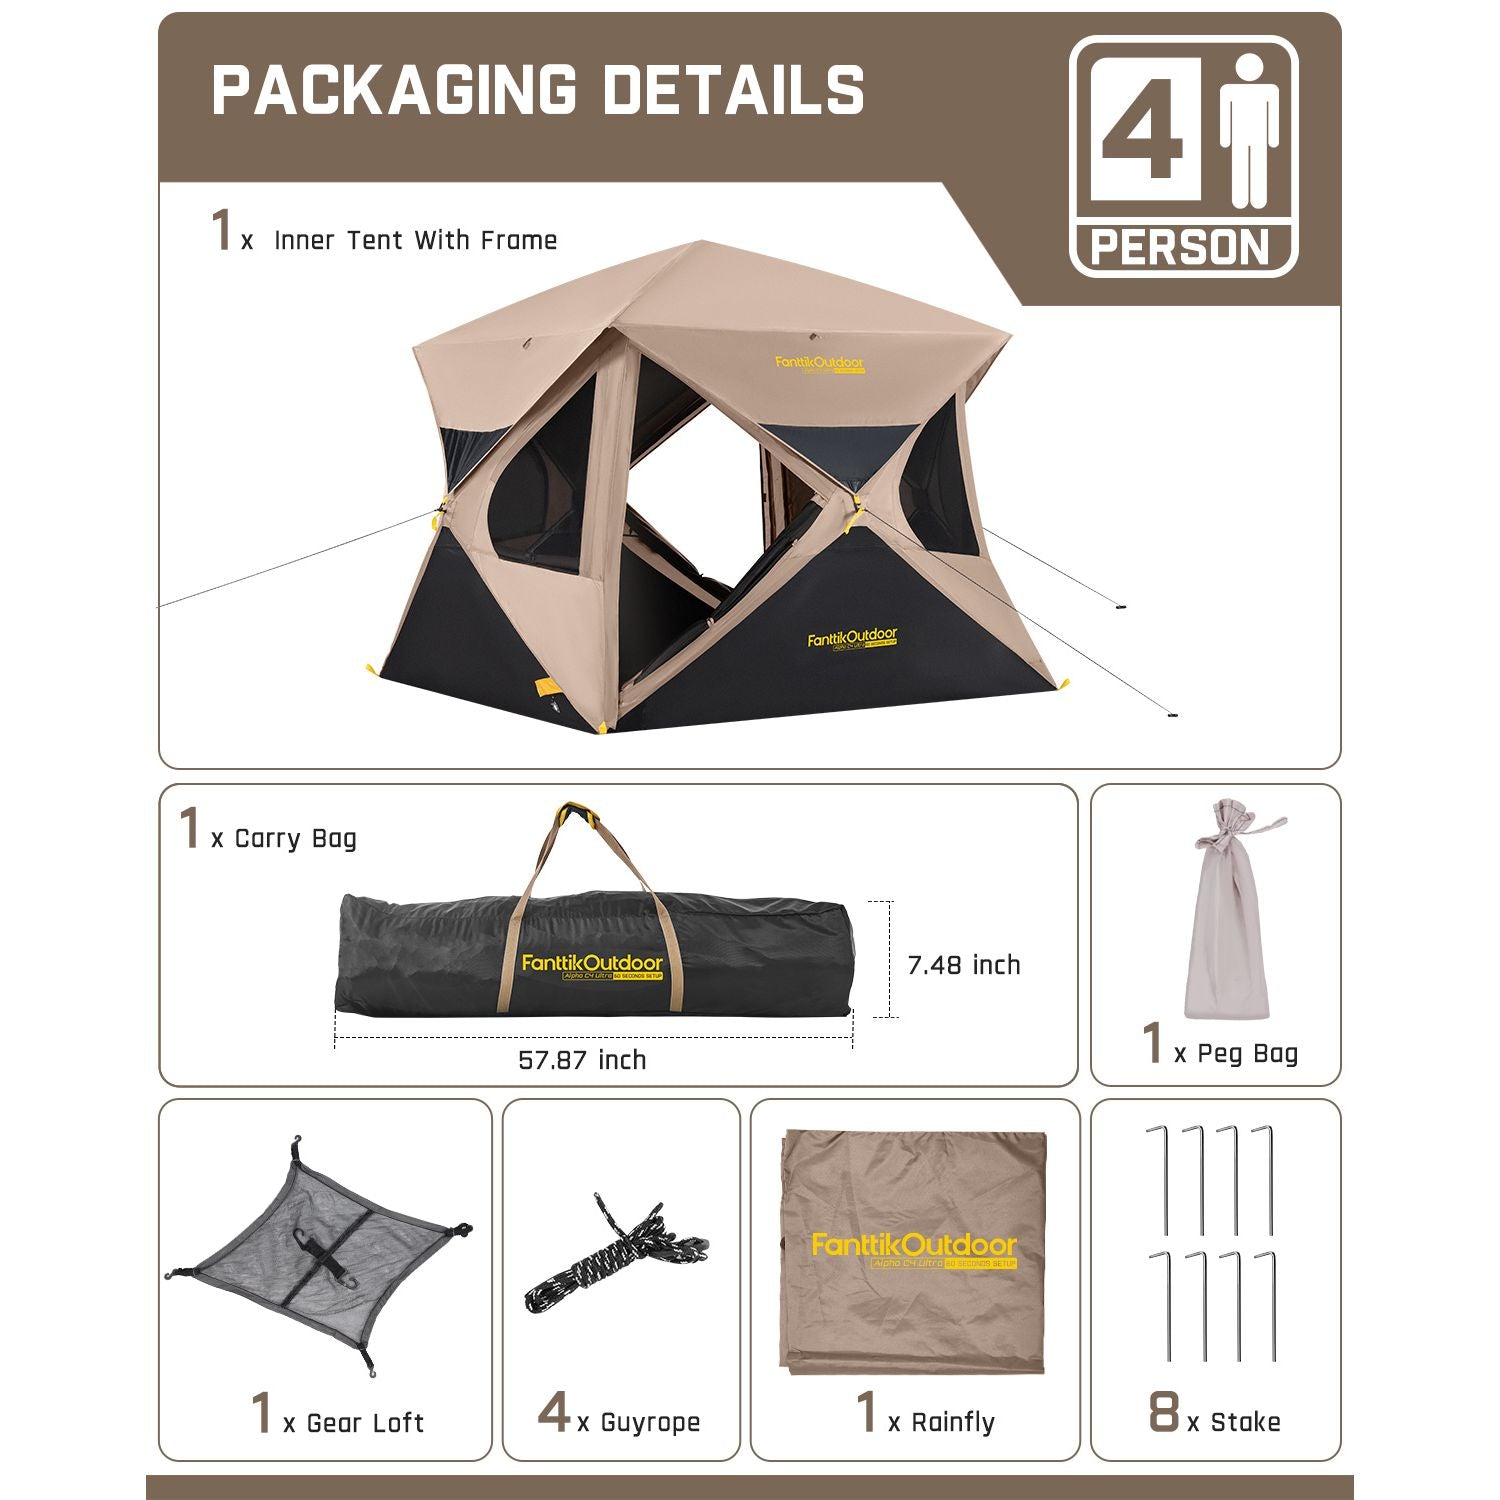 FanttikOutdoor Alpha C4 Ultra Instant Cabin Tent packaging details showing components for a 4-person tent: inner tent with frame, carry bag, peg bag, gear loft, guy ropes, rainfly, and stakes.